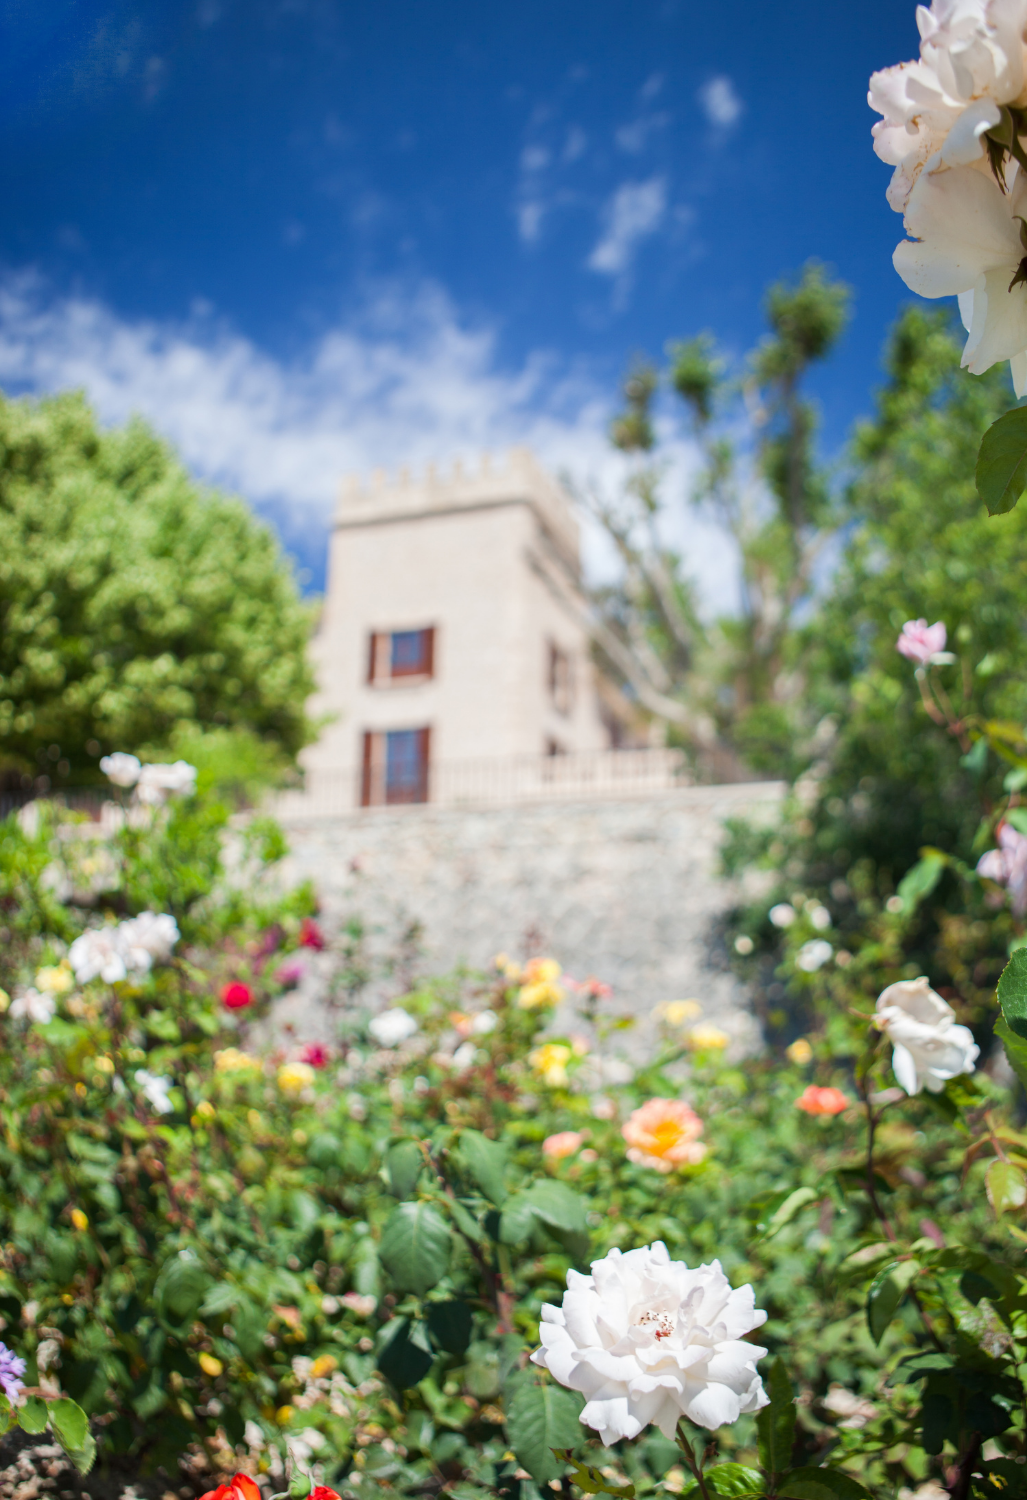 Focus on colourful flowers in a garden with Castell blurred on the background